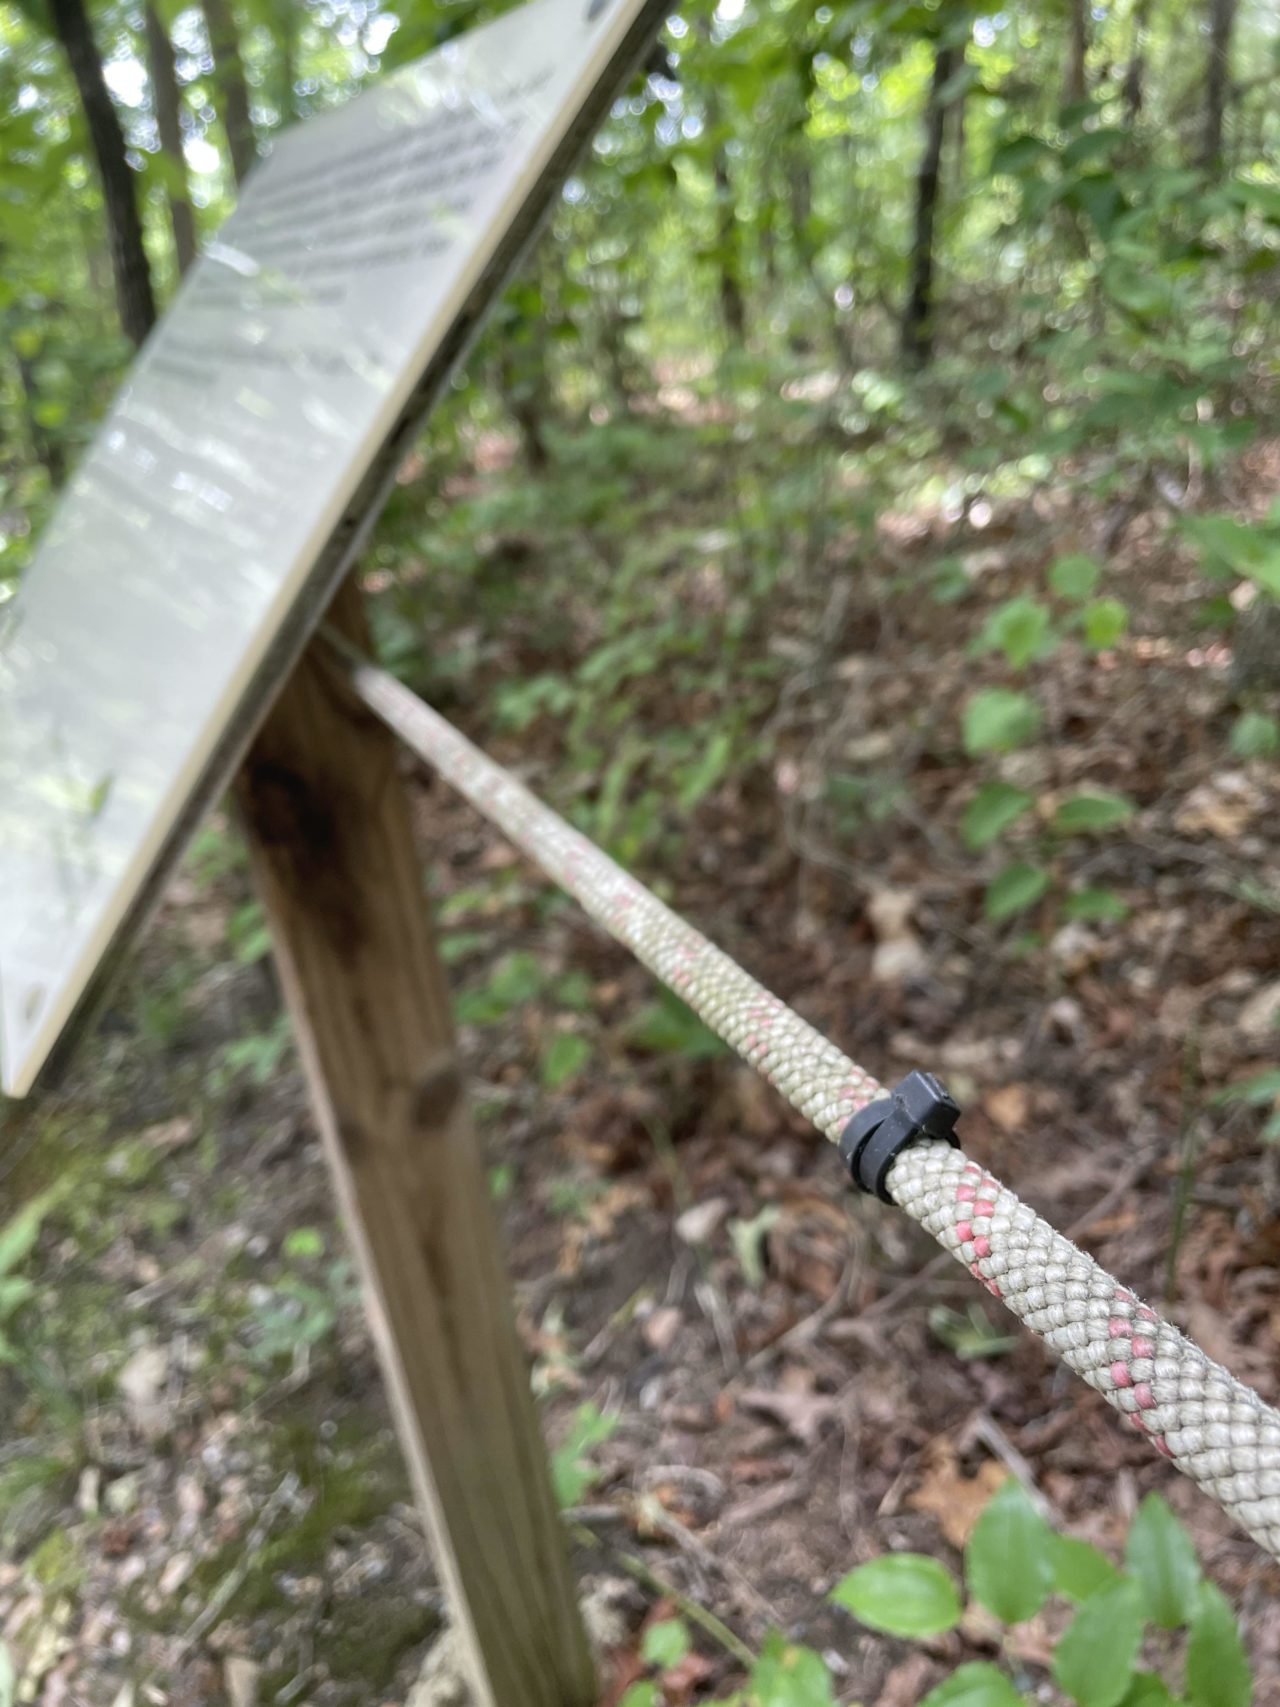 A guide rope with zip ties and a sign with both braille and large print. This is the Braille Trail at Gwinnett Environmental and Hertiage Center in Georgia.